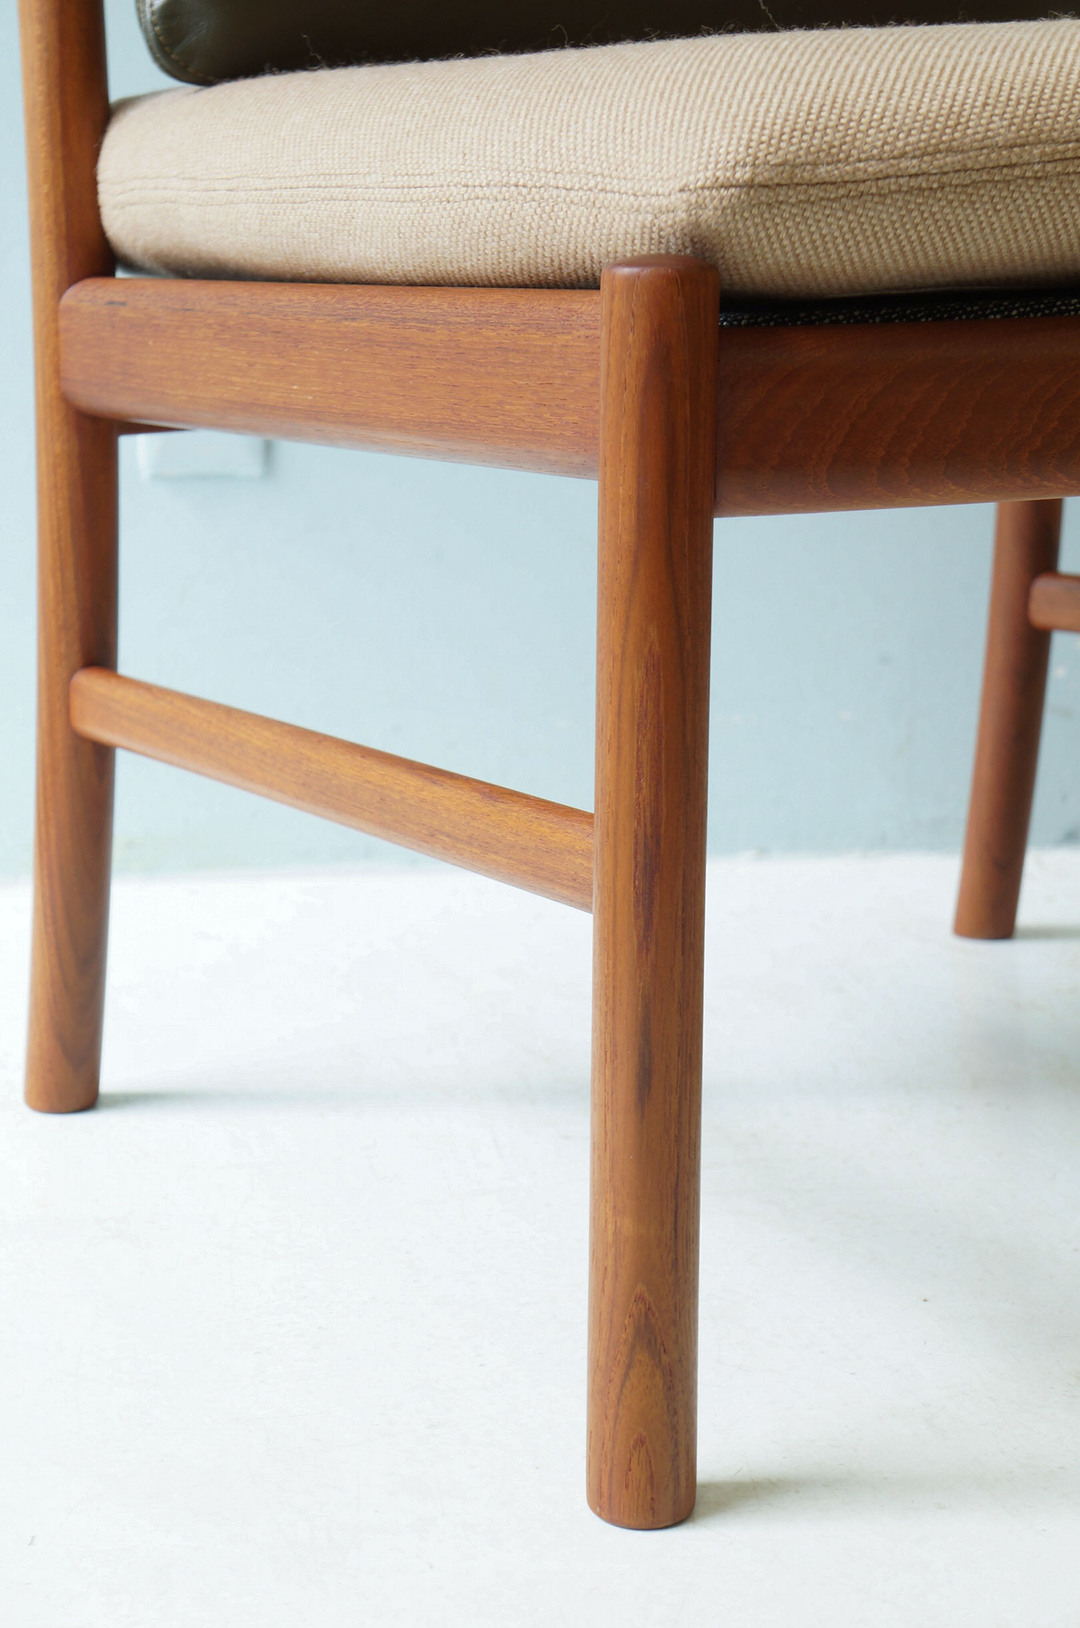 Japanese Vintage HITA CRAFTS Dining Chair Armless/日田工芸 ダイニングチェア アームレス ジャパンヴィンテージ チーク材 1